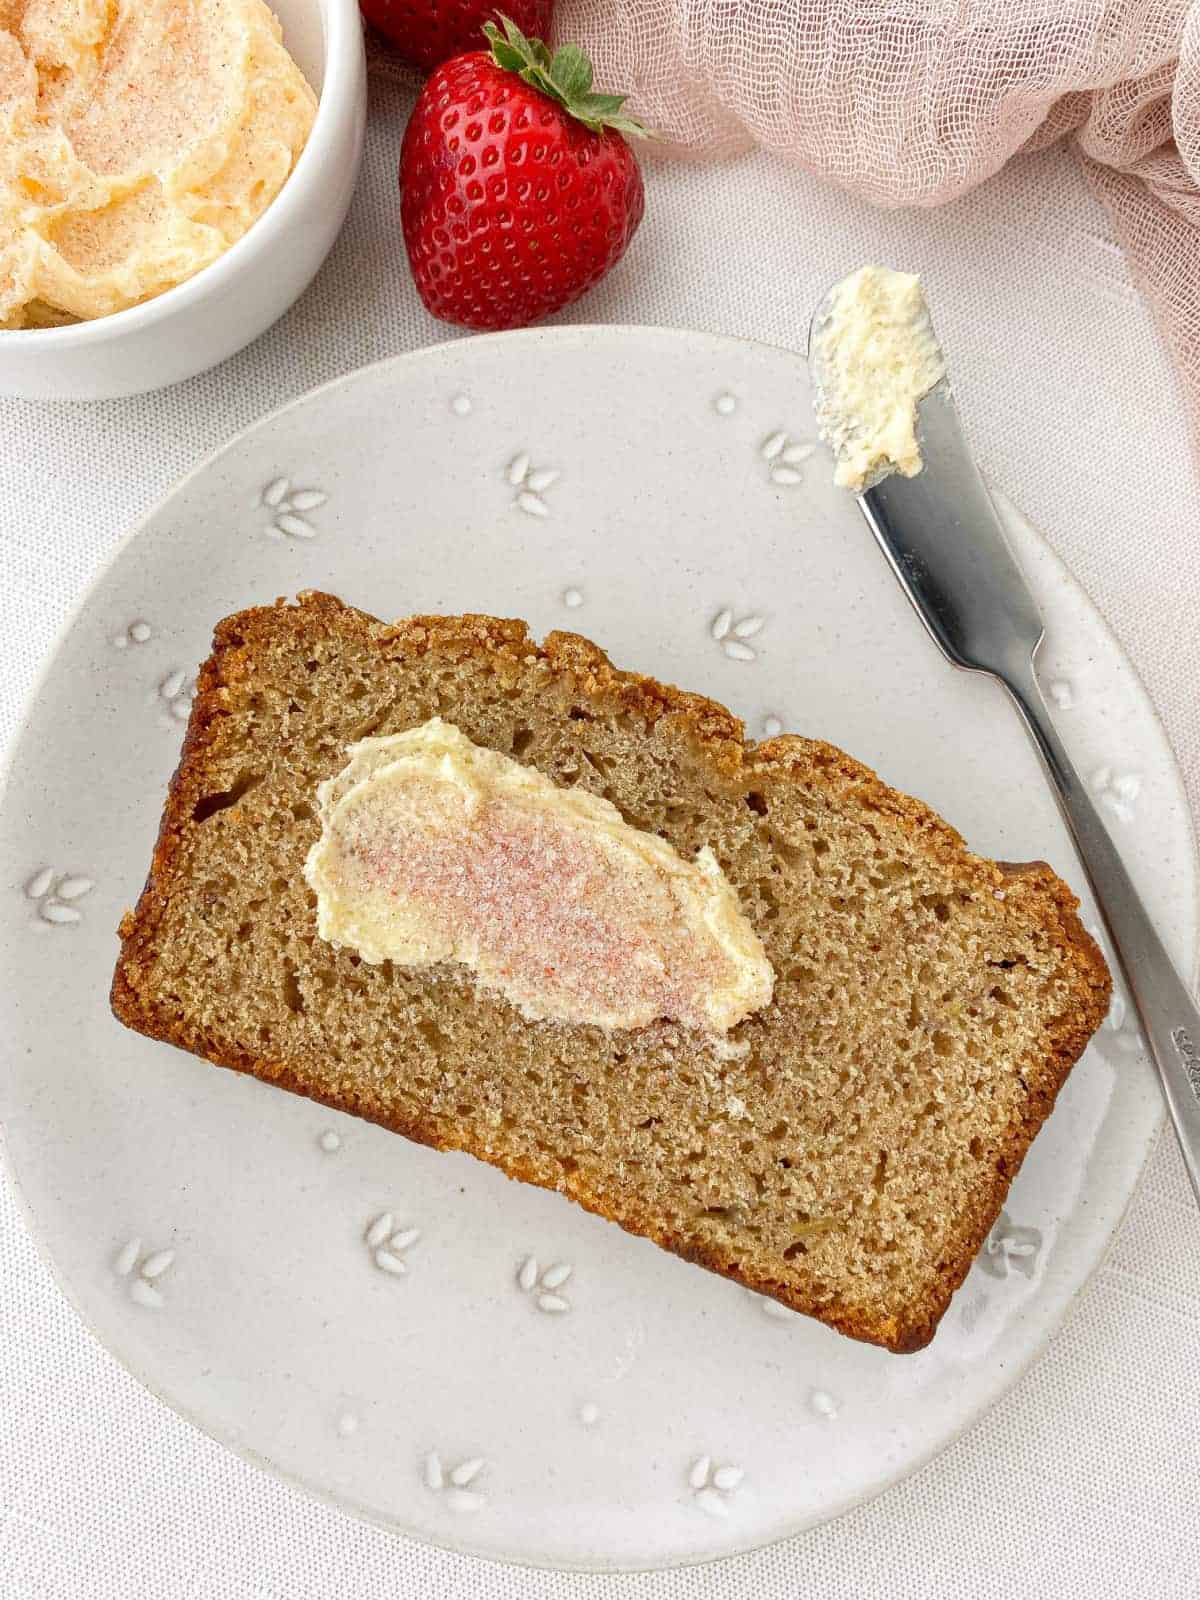 Slice of banana bread with strawberry sugar butter on a white plate.